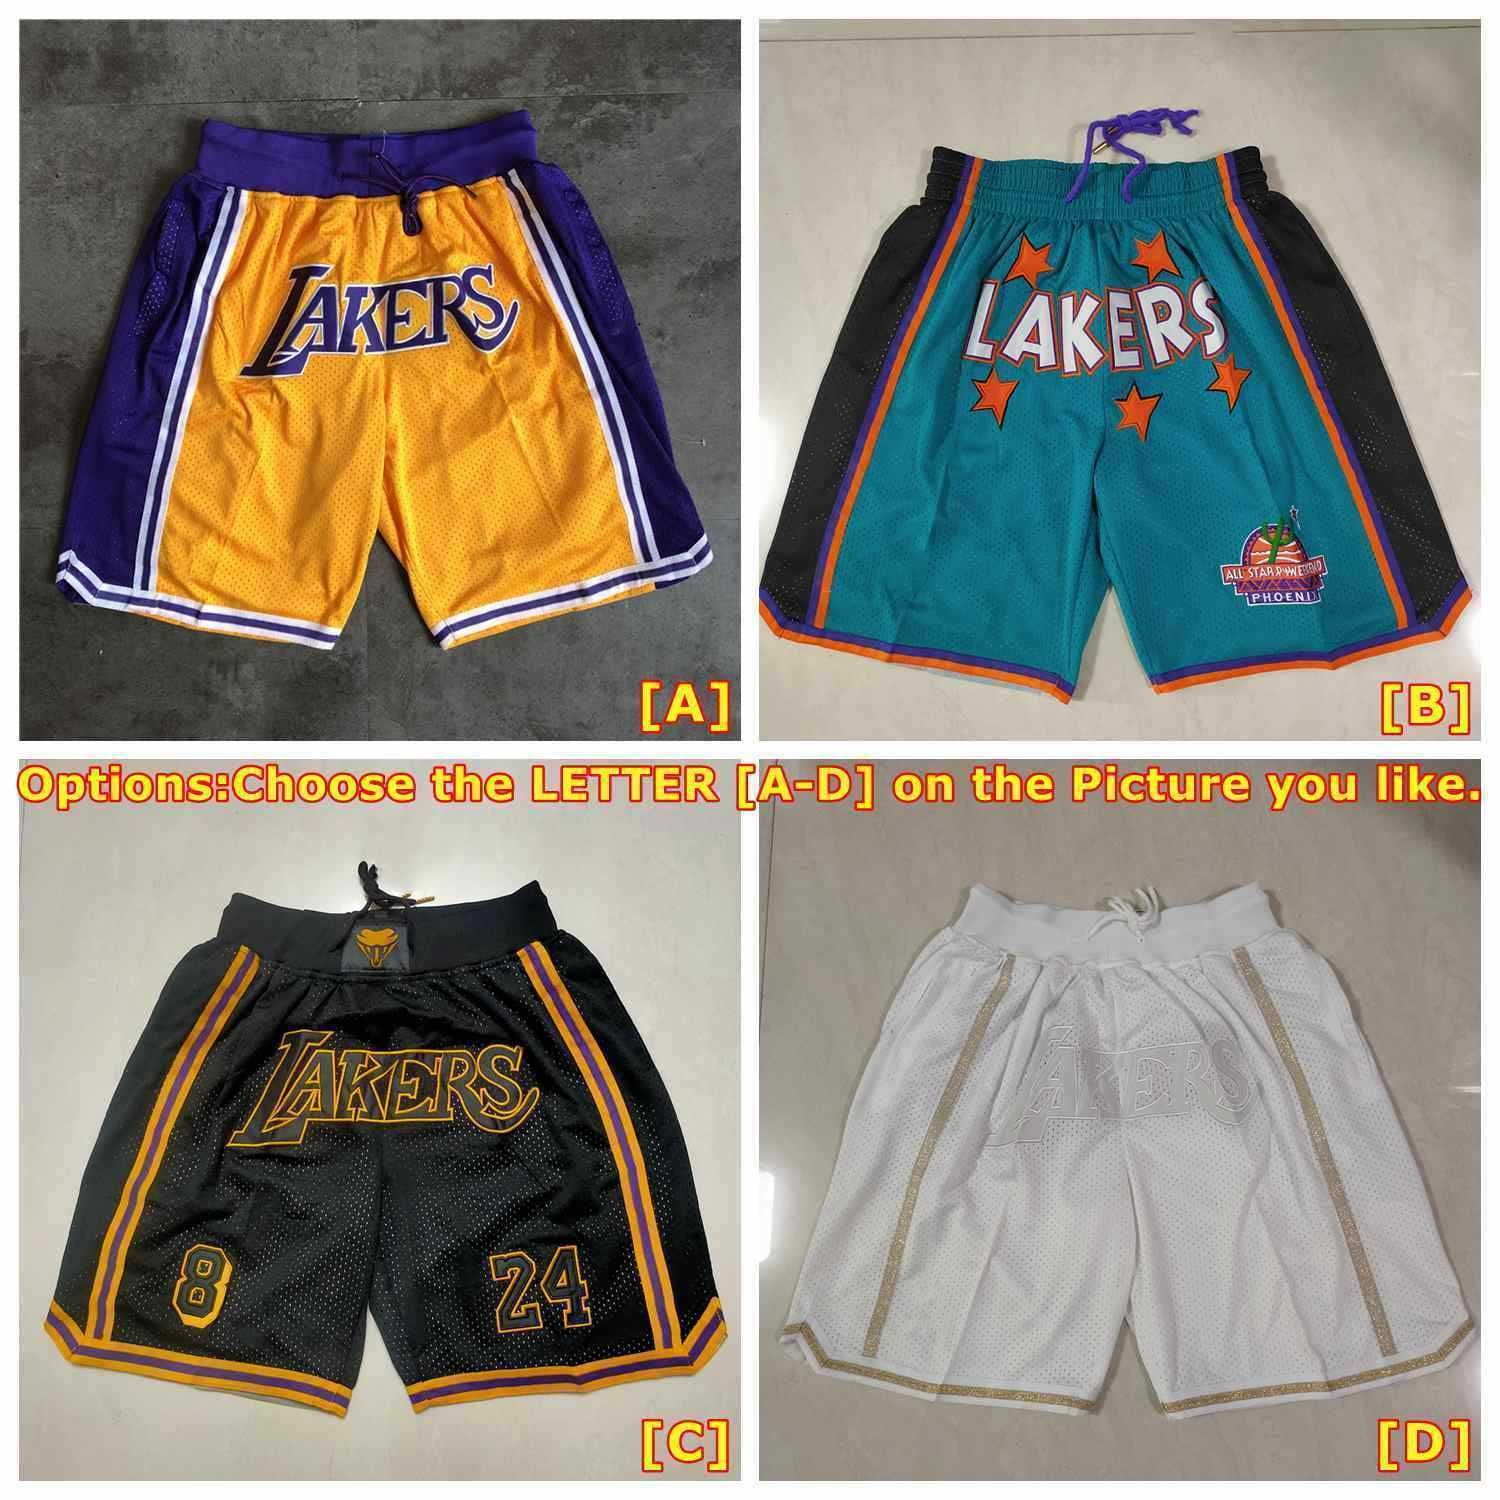 Just Don NBA Shorts Available Now – Feature